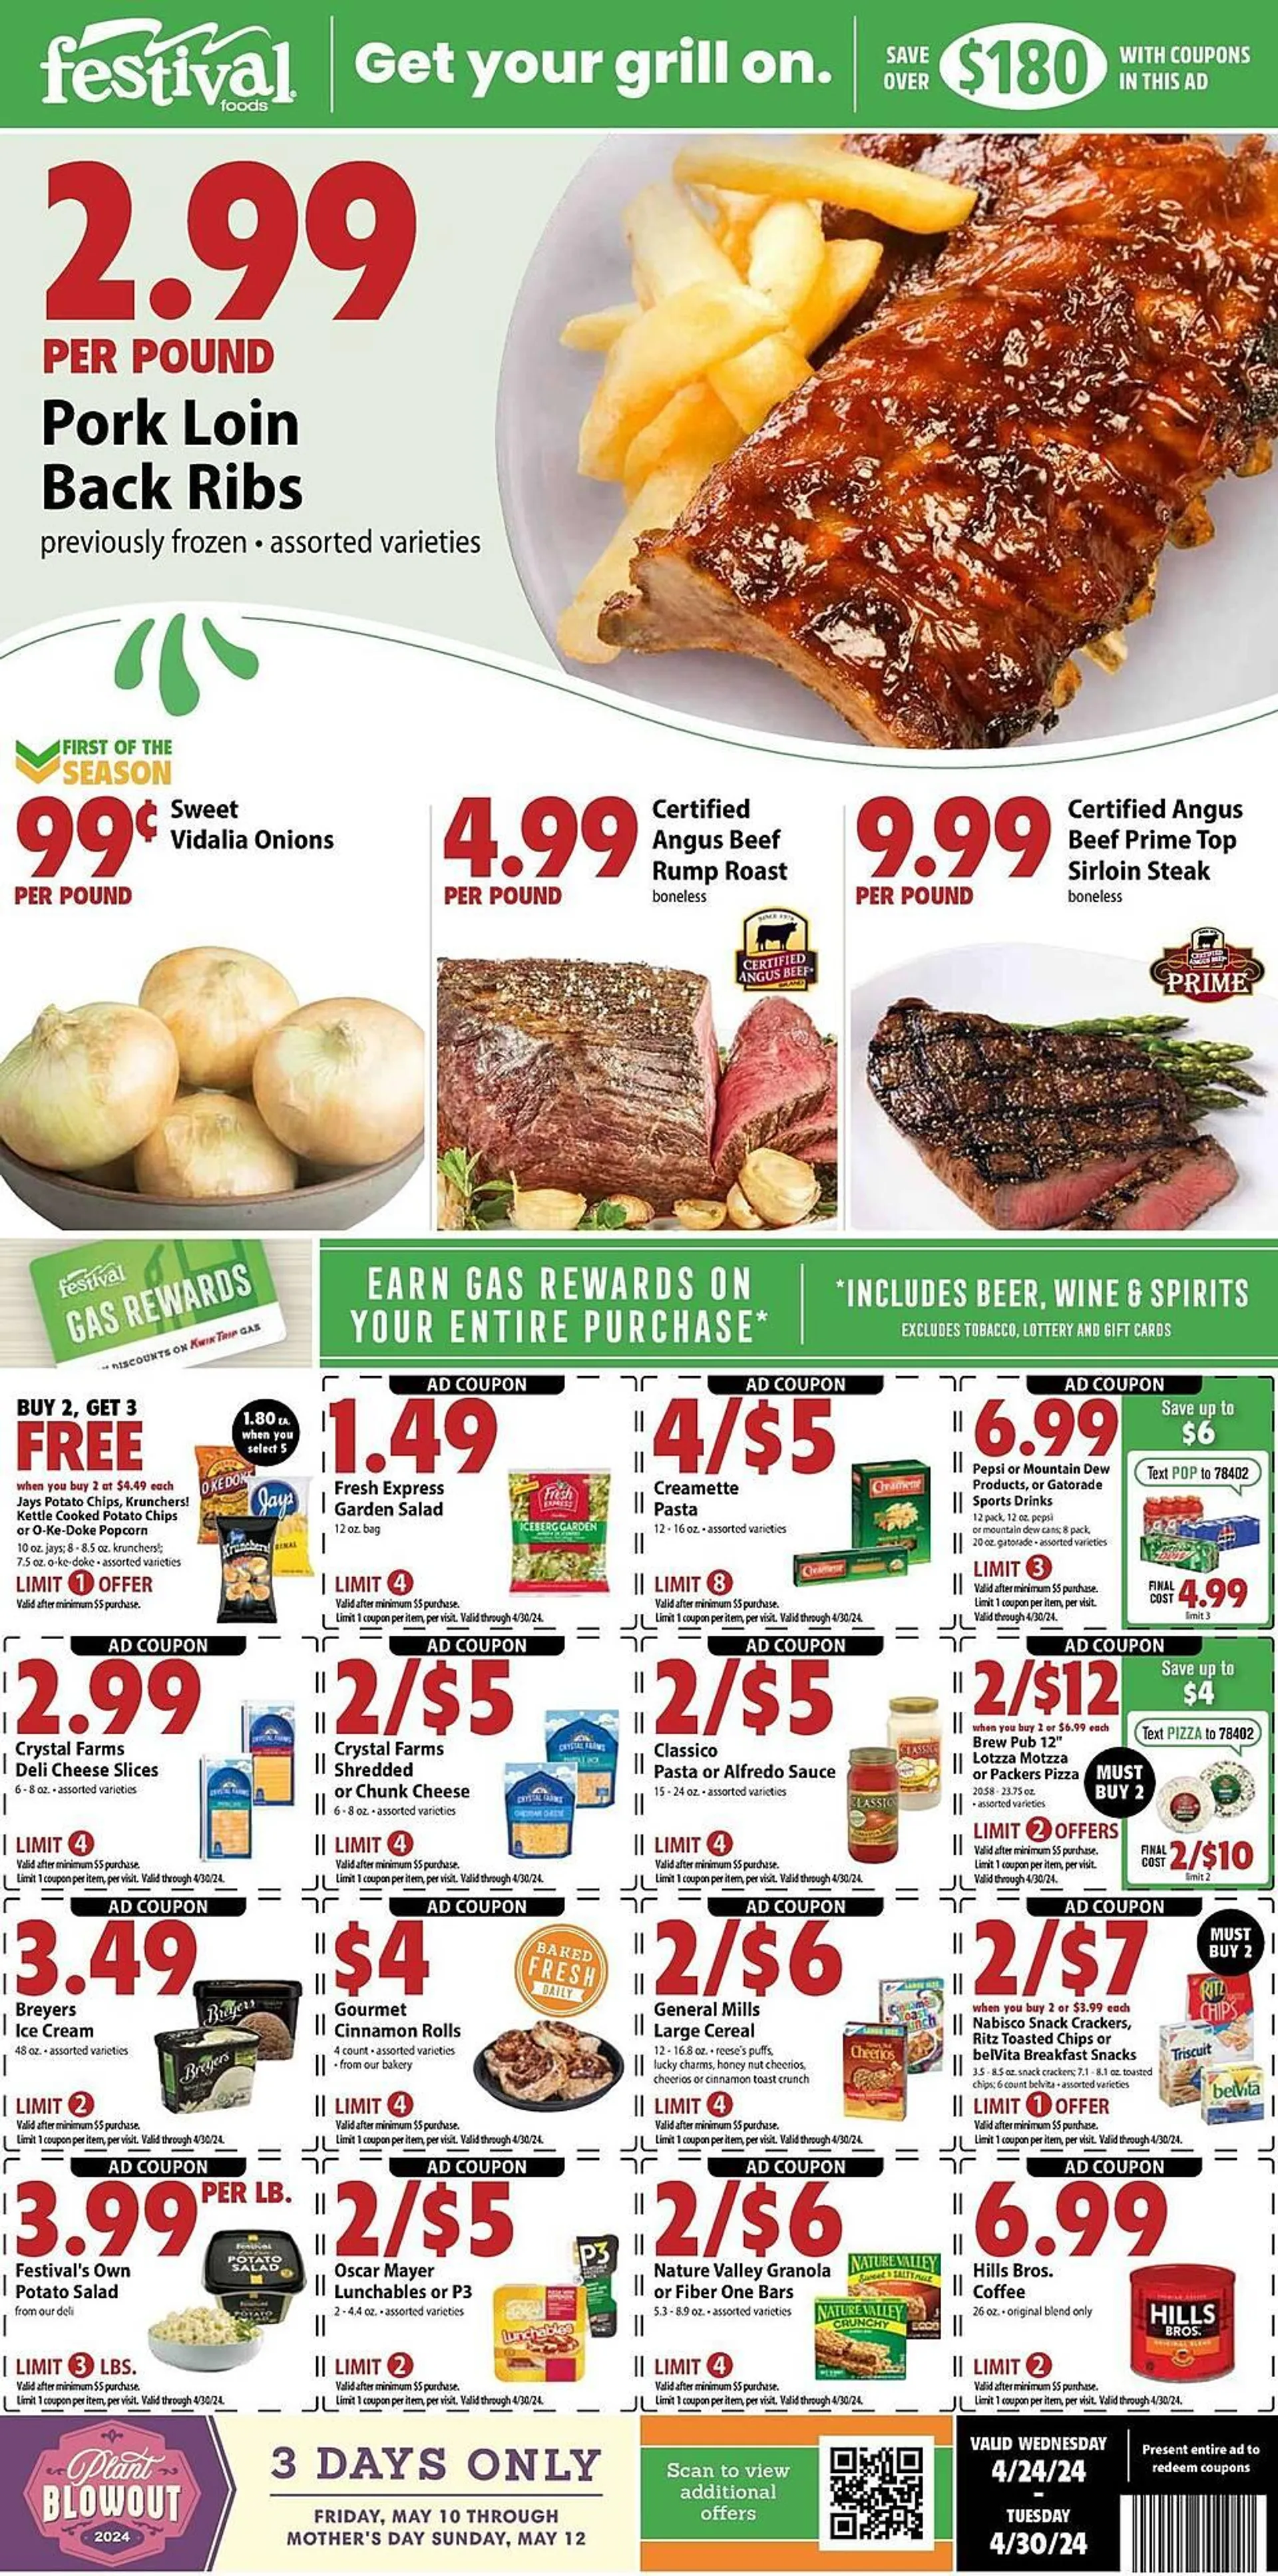 Festival Foods Weekly Ad - 1